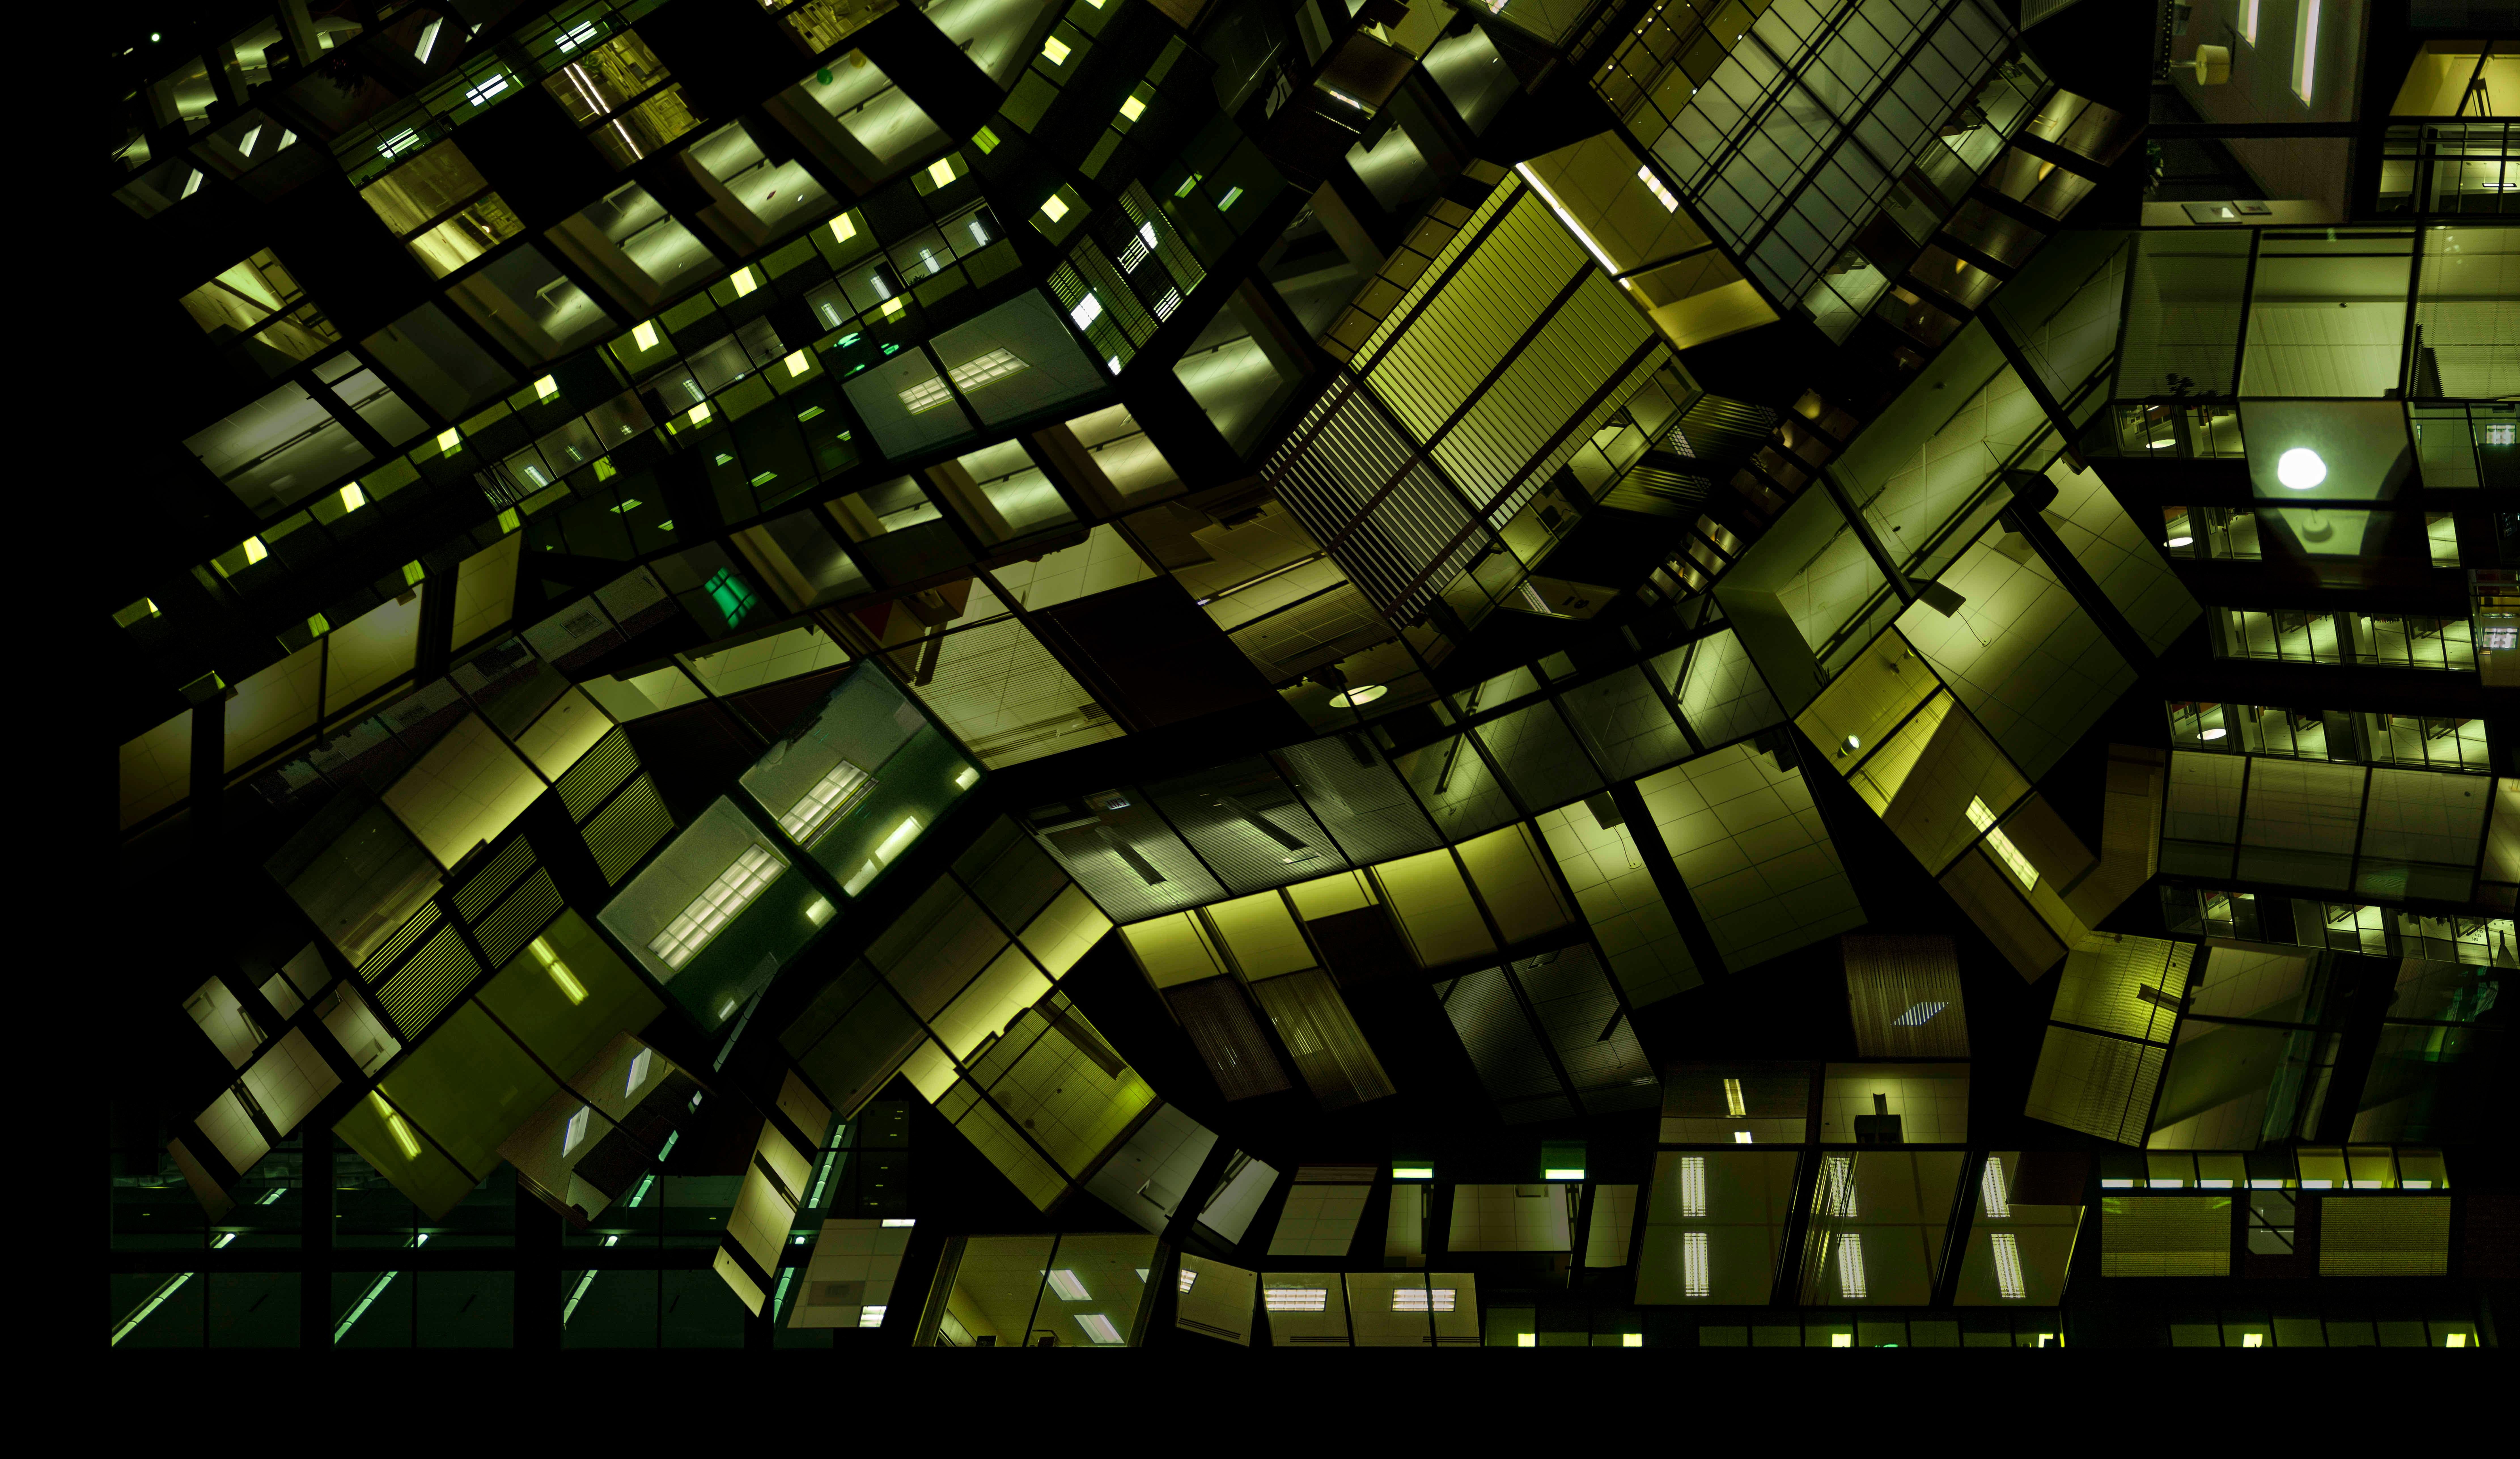 Urban Codes - Contemporary Abstract Architectural City Photography By Night
Lichtdiagramm 05
Edition 2/3 + 1 AP
C-Print is unframed and will be shipped with a signed sticker.

Hubert Blanz's artistic works mainly deal with urban infrastructure,